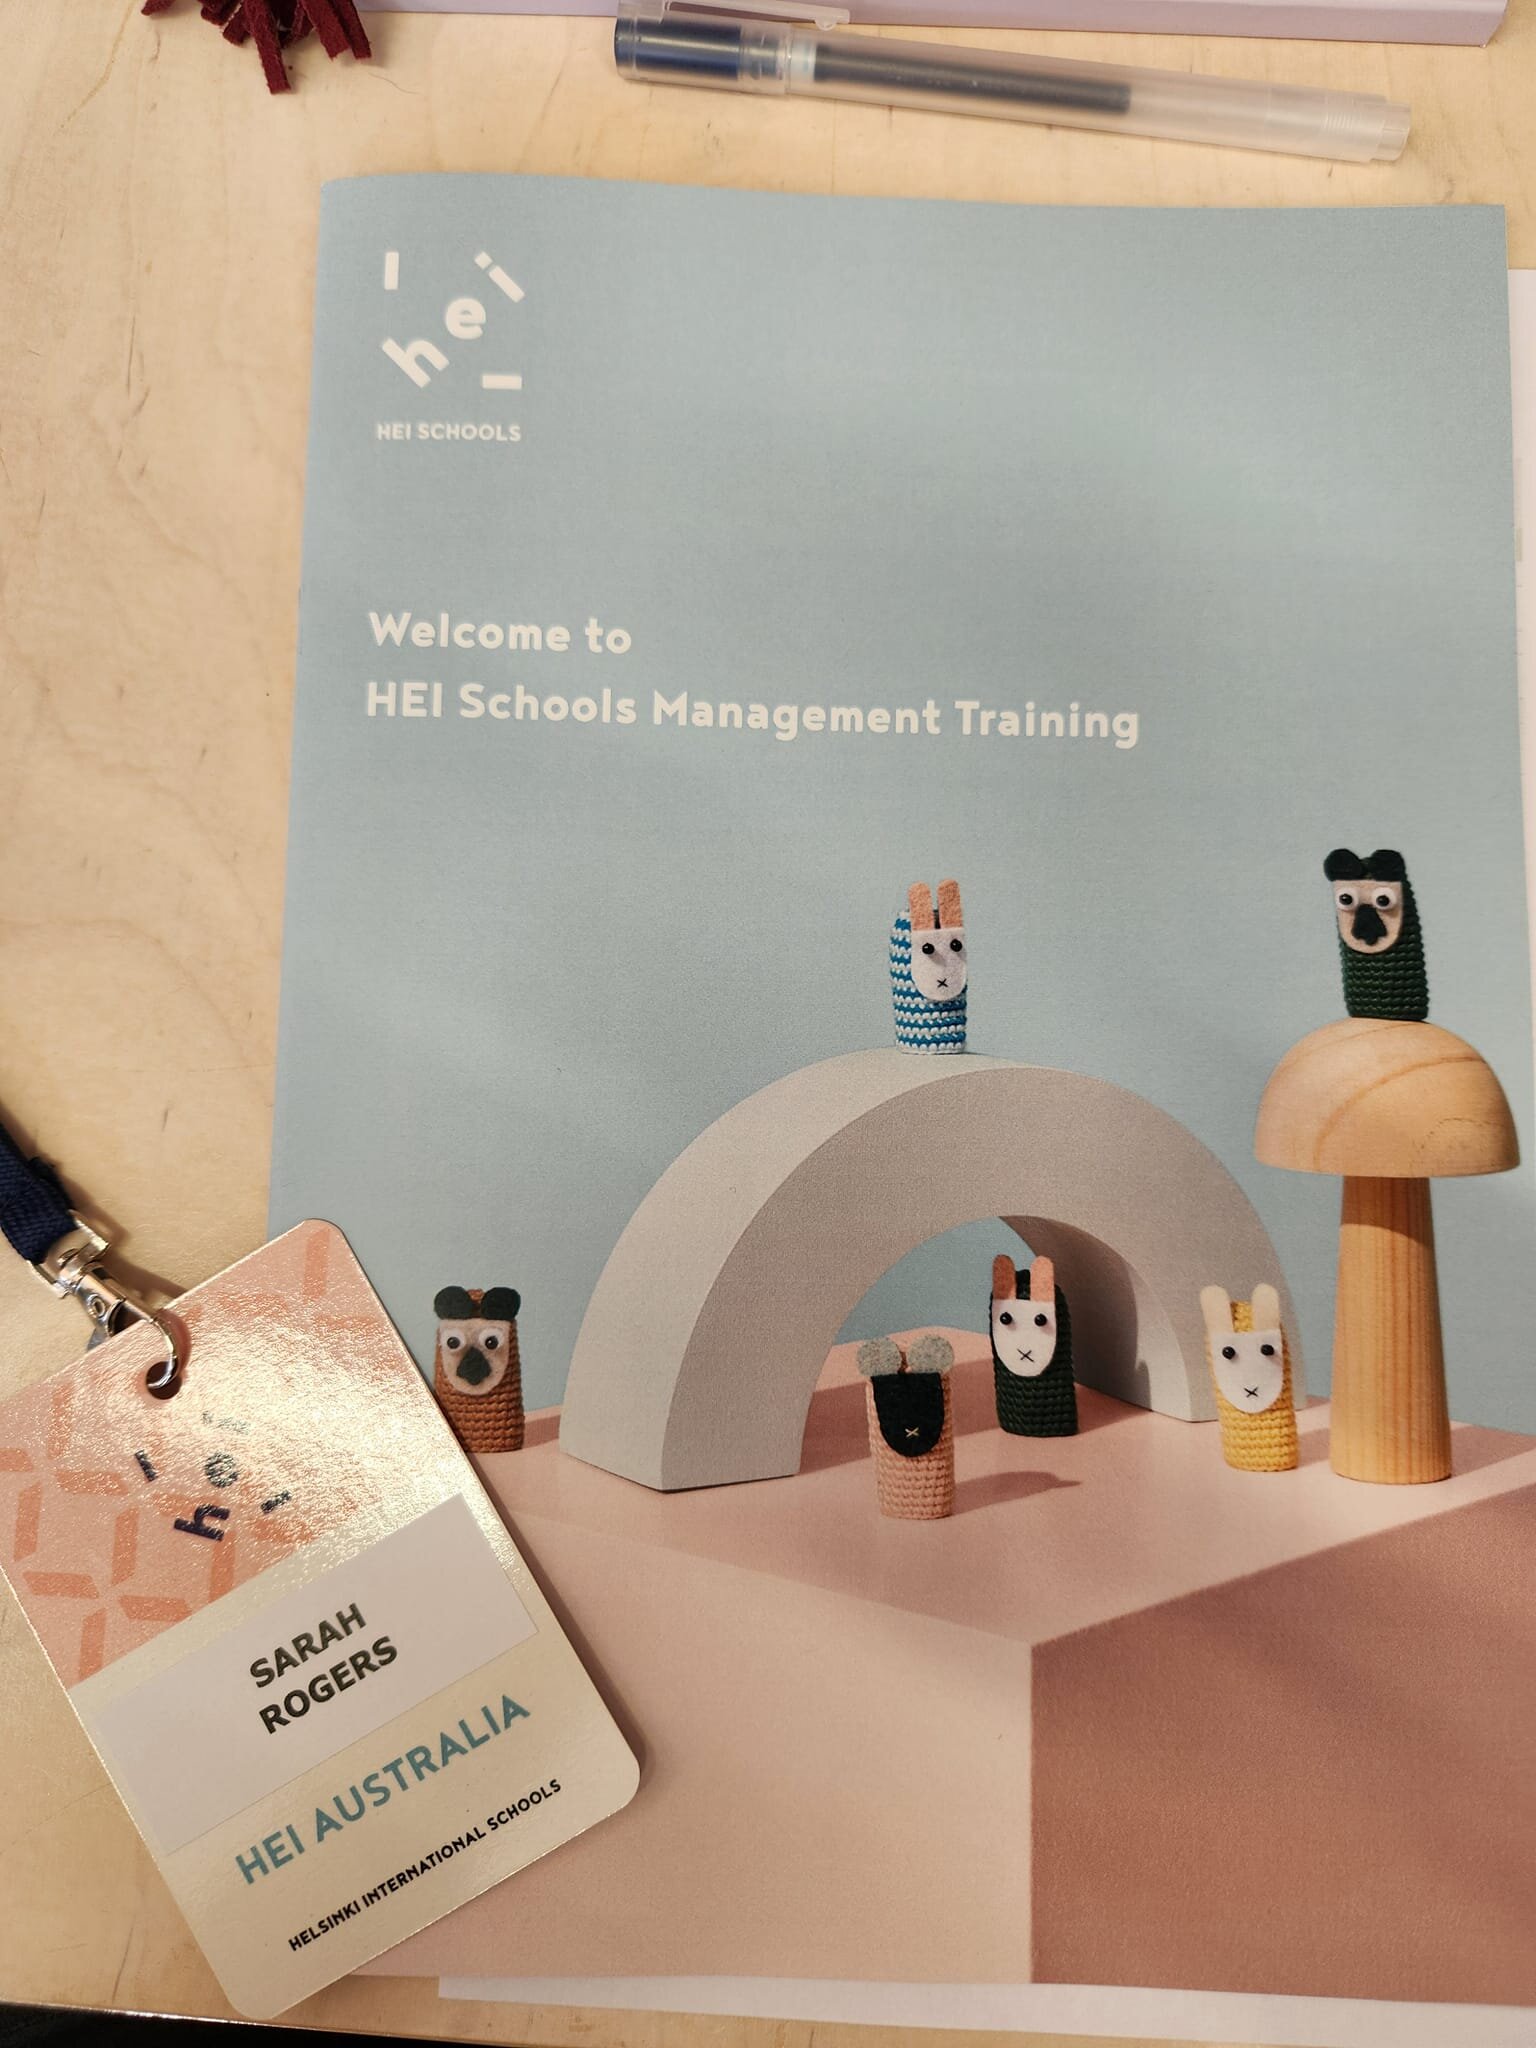 Hei From Finland!

We have started our first day of HEI management training in Helsinki. We are meeting over 30 principal from 20 HEI schools over the world, sharing our goals and missions. 

HEI Schools aim at providing high quality early education 